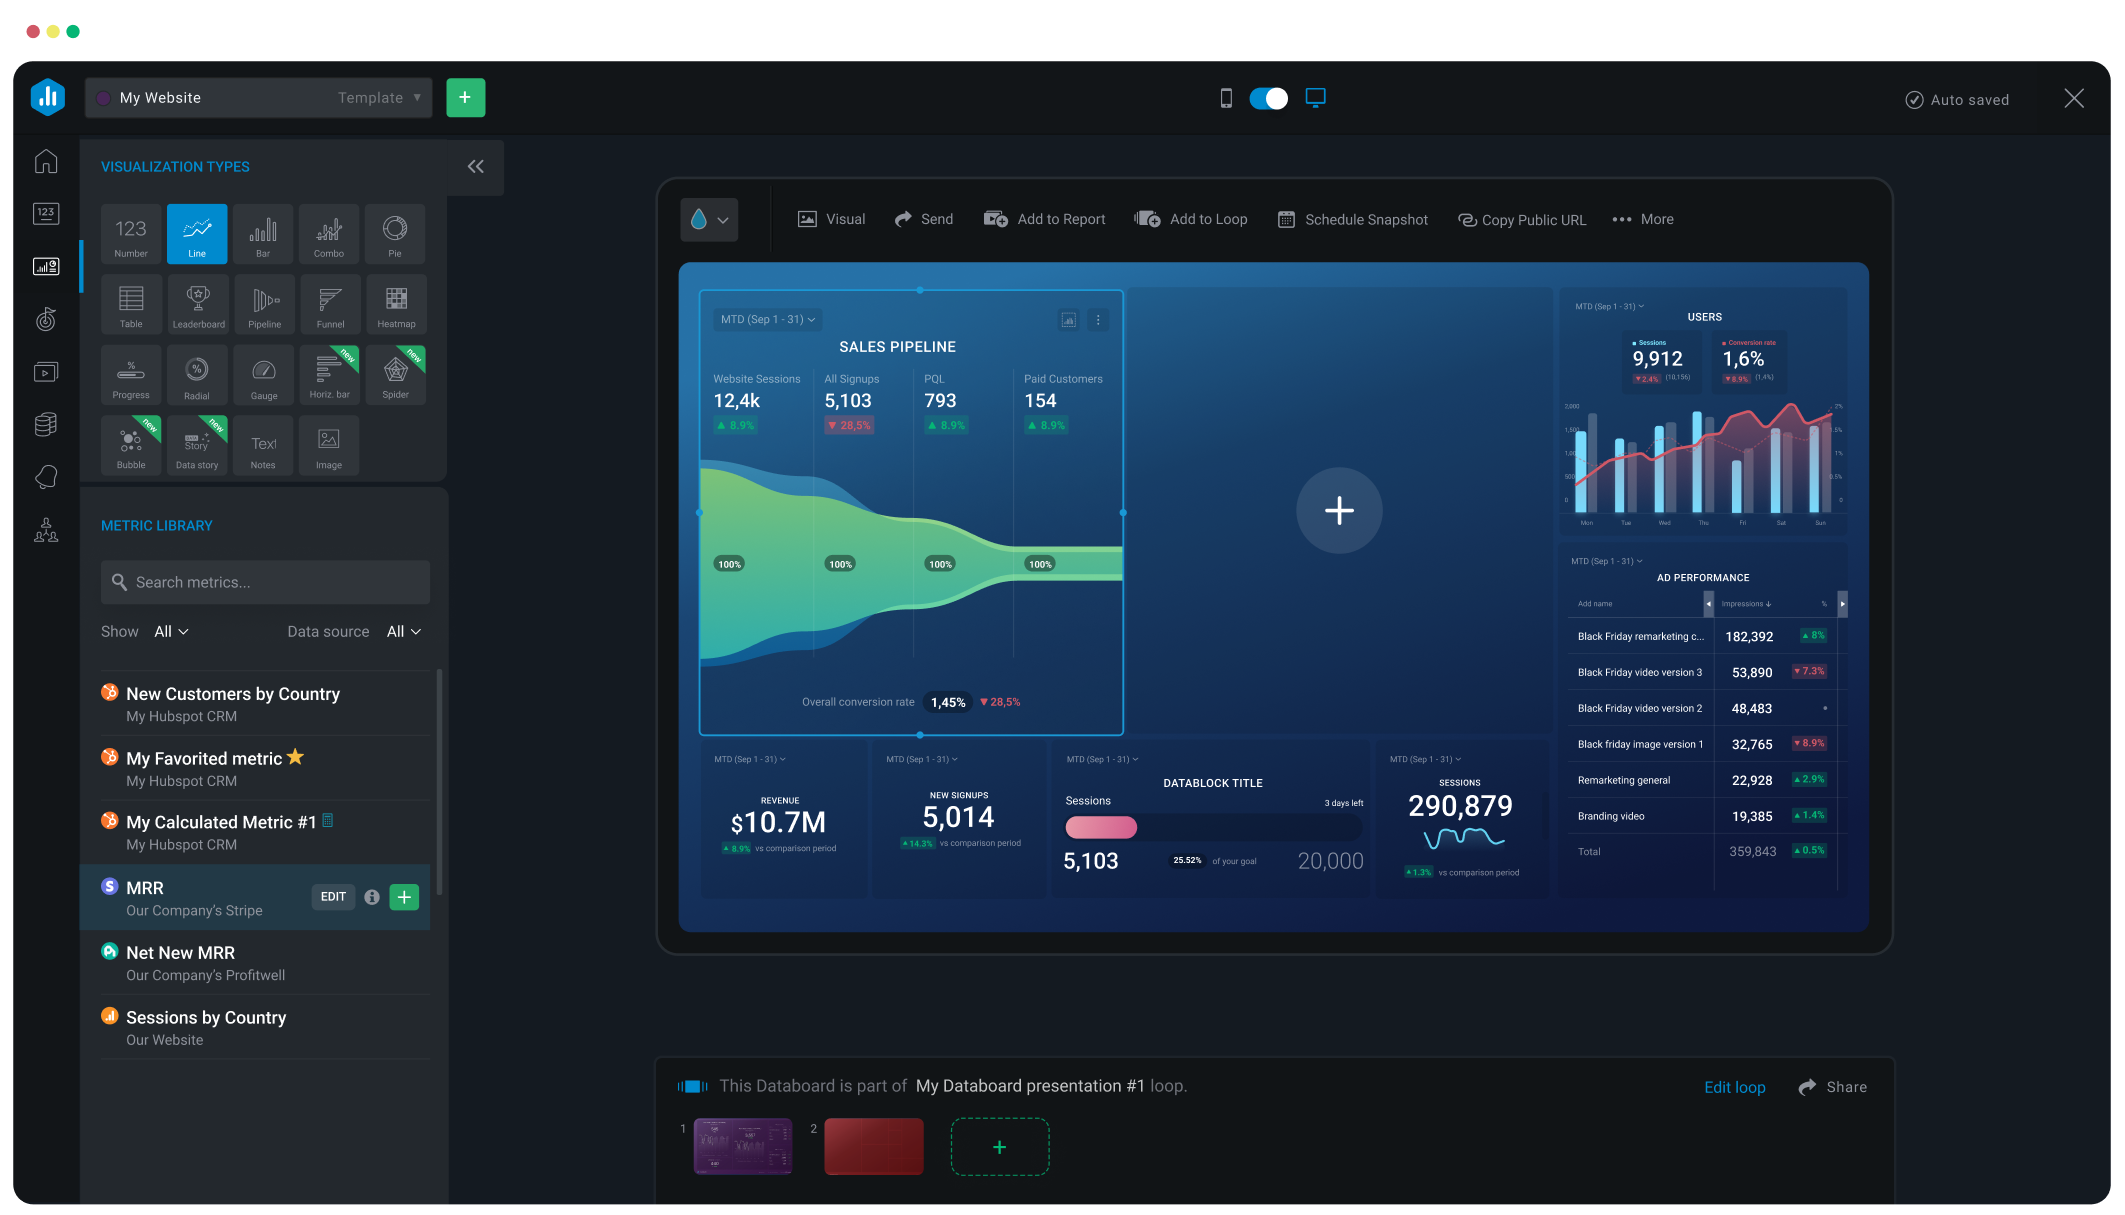 Databox data visualization dashboard that shows metrics such as sales pipeline, customer locations, ad performance, etc.